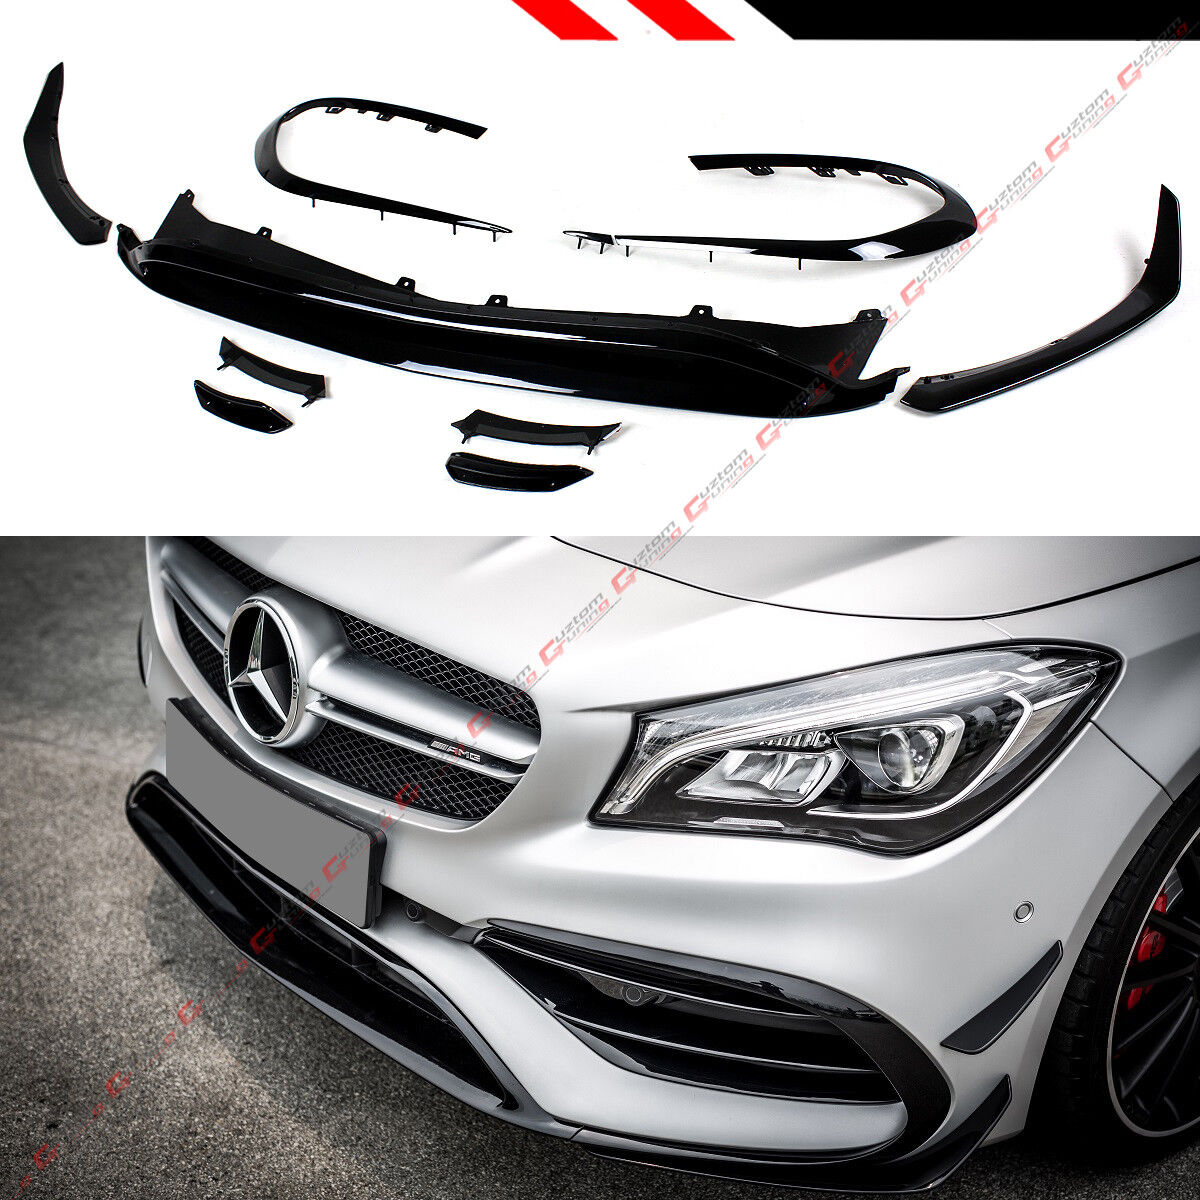 FOR 2017-19 BENZ CLA43 CLA250 AMG W117 GLOSS BLK 9PC FRONT BUMPER CANARD LIP KIT